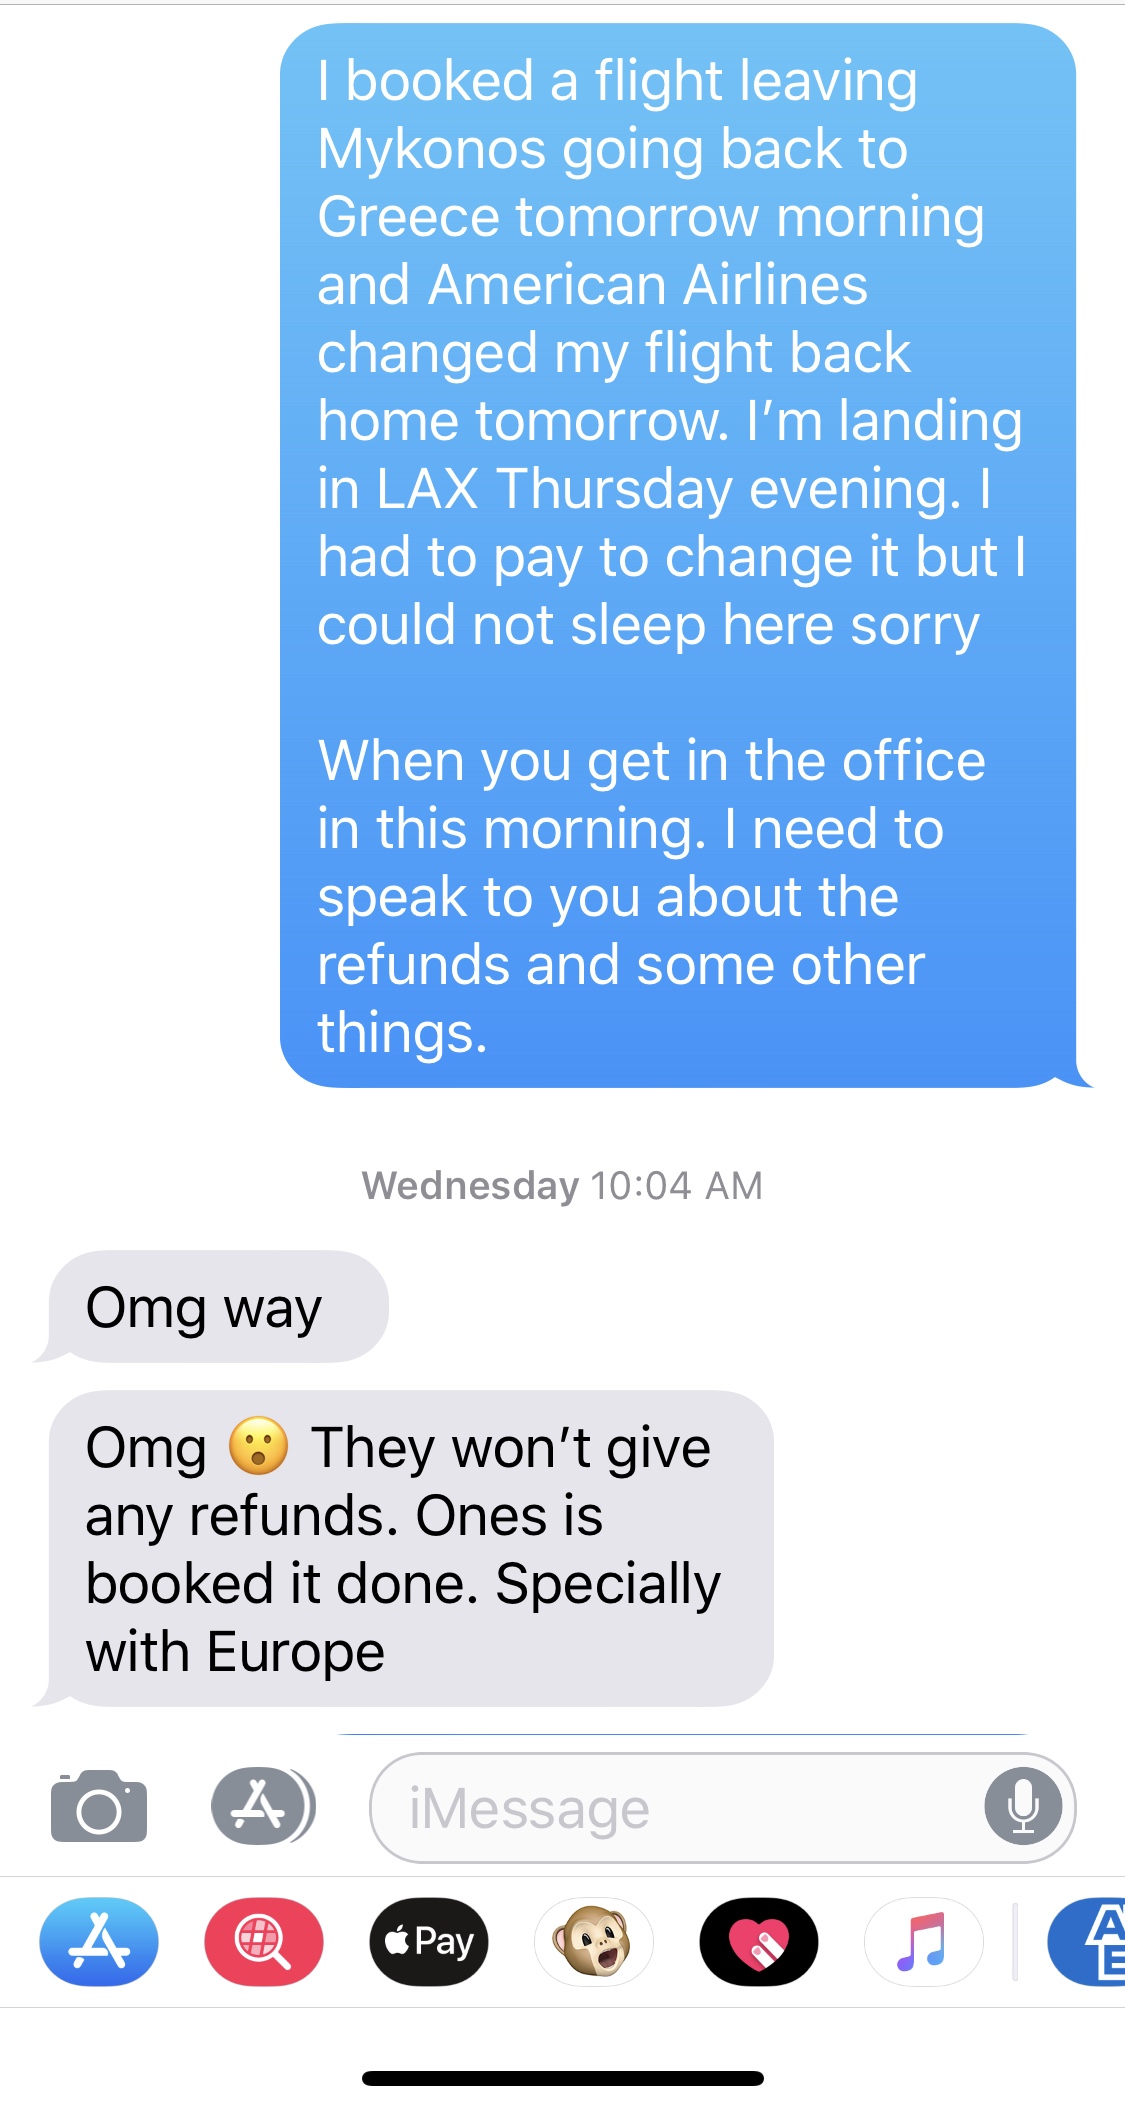 apparently refunds are not possible